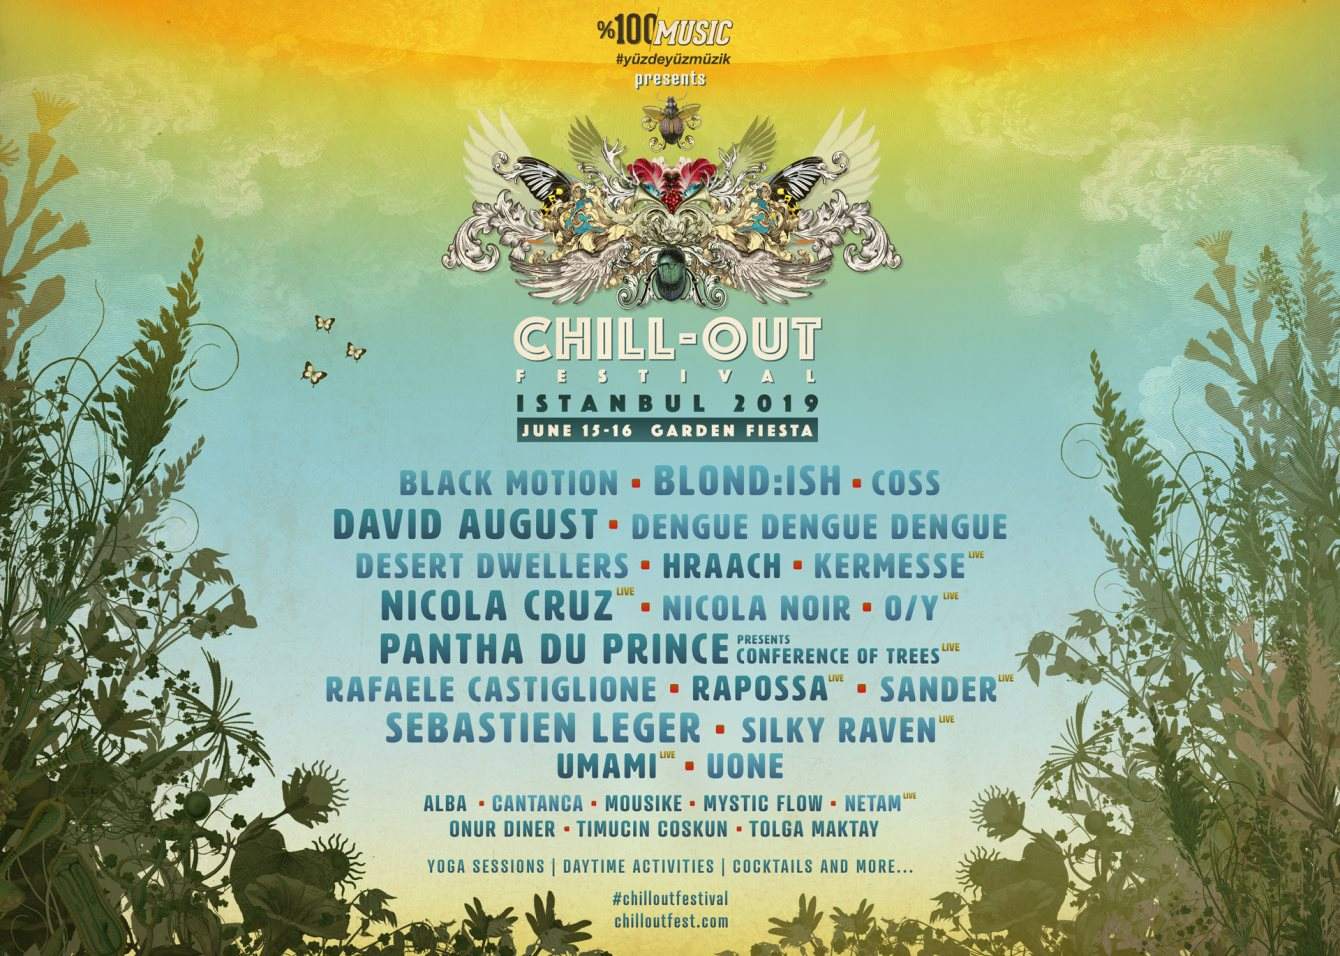 Chill-Out Festival Istanbul 2019 presented by 100% Music - フライヤー表